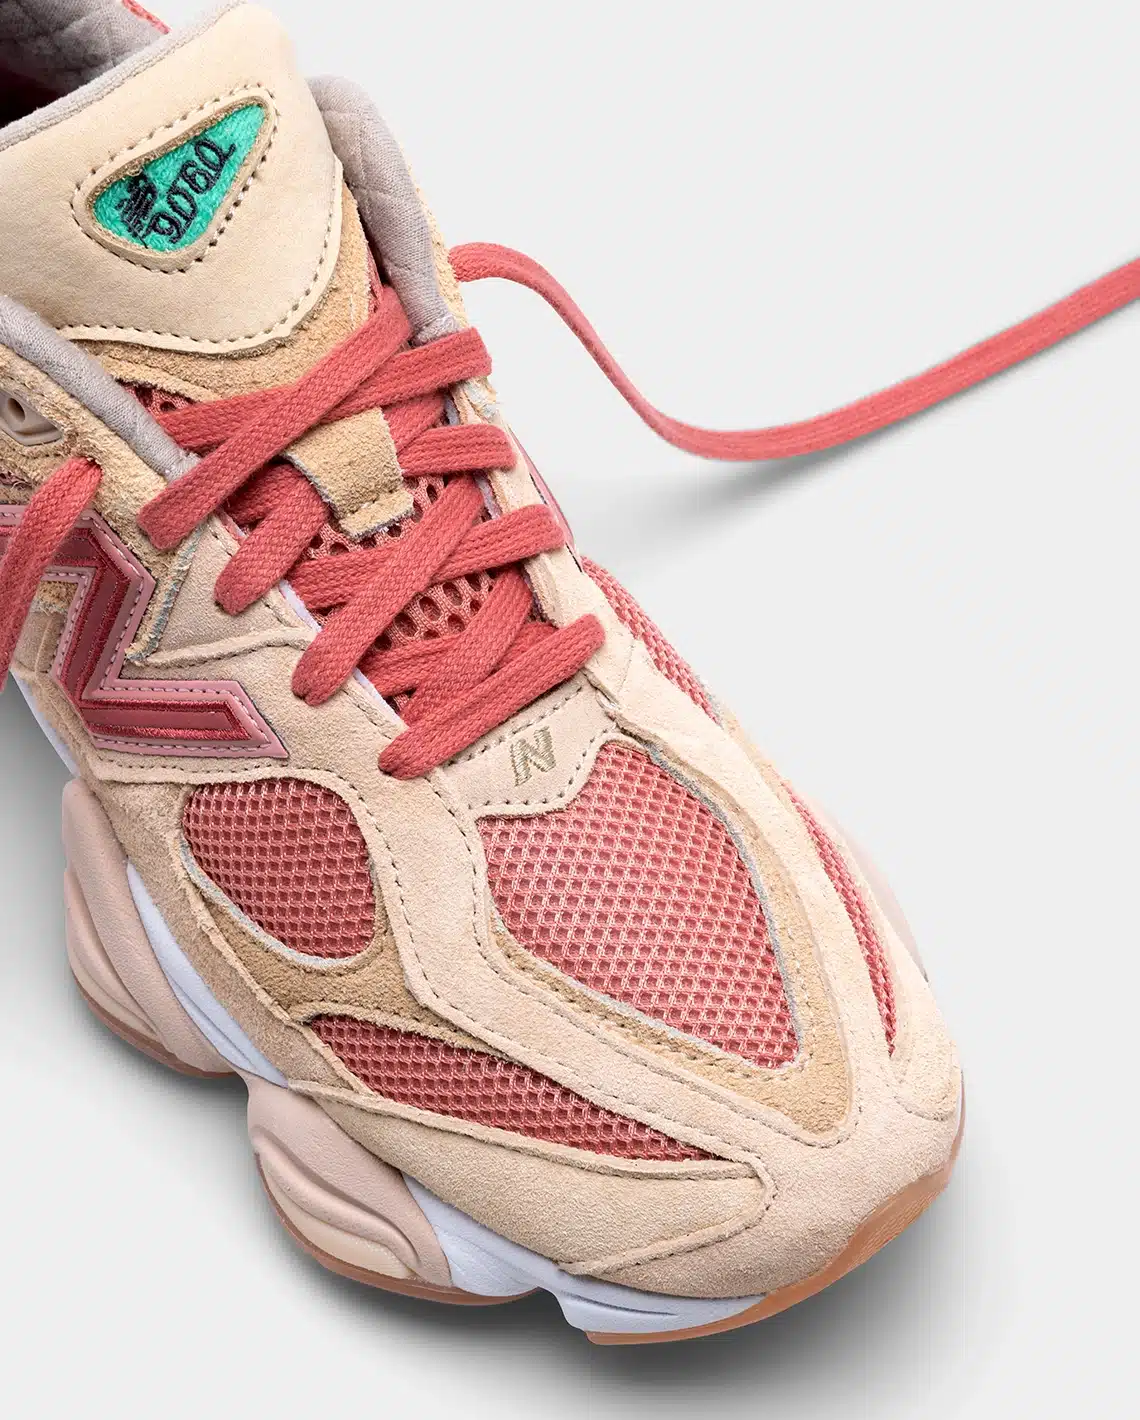 joefreshgoods new balance 9060 penny cookie pink release date 3